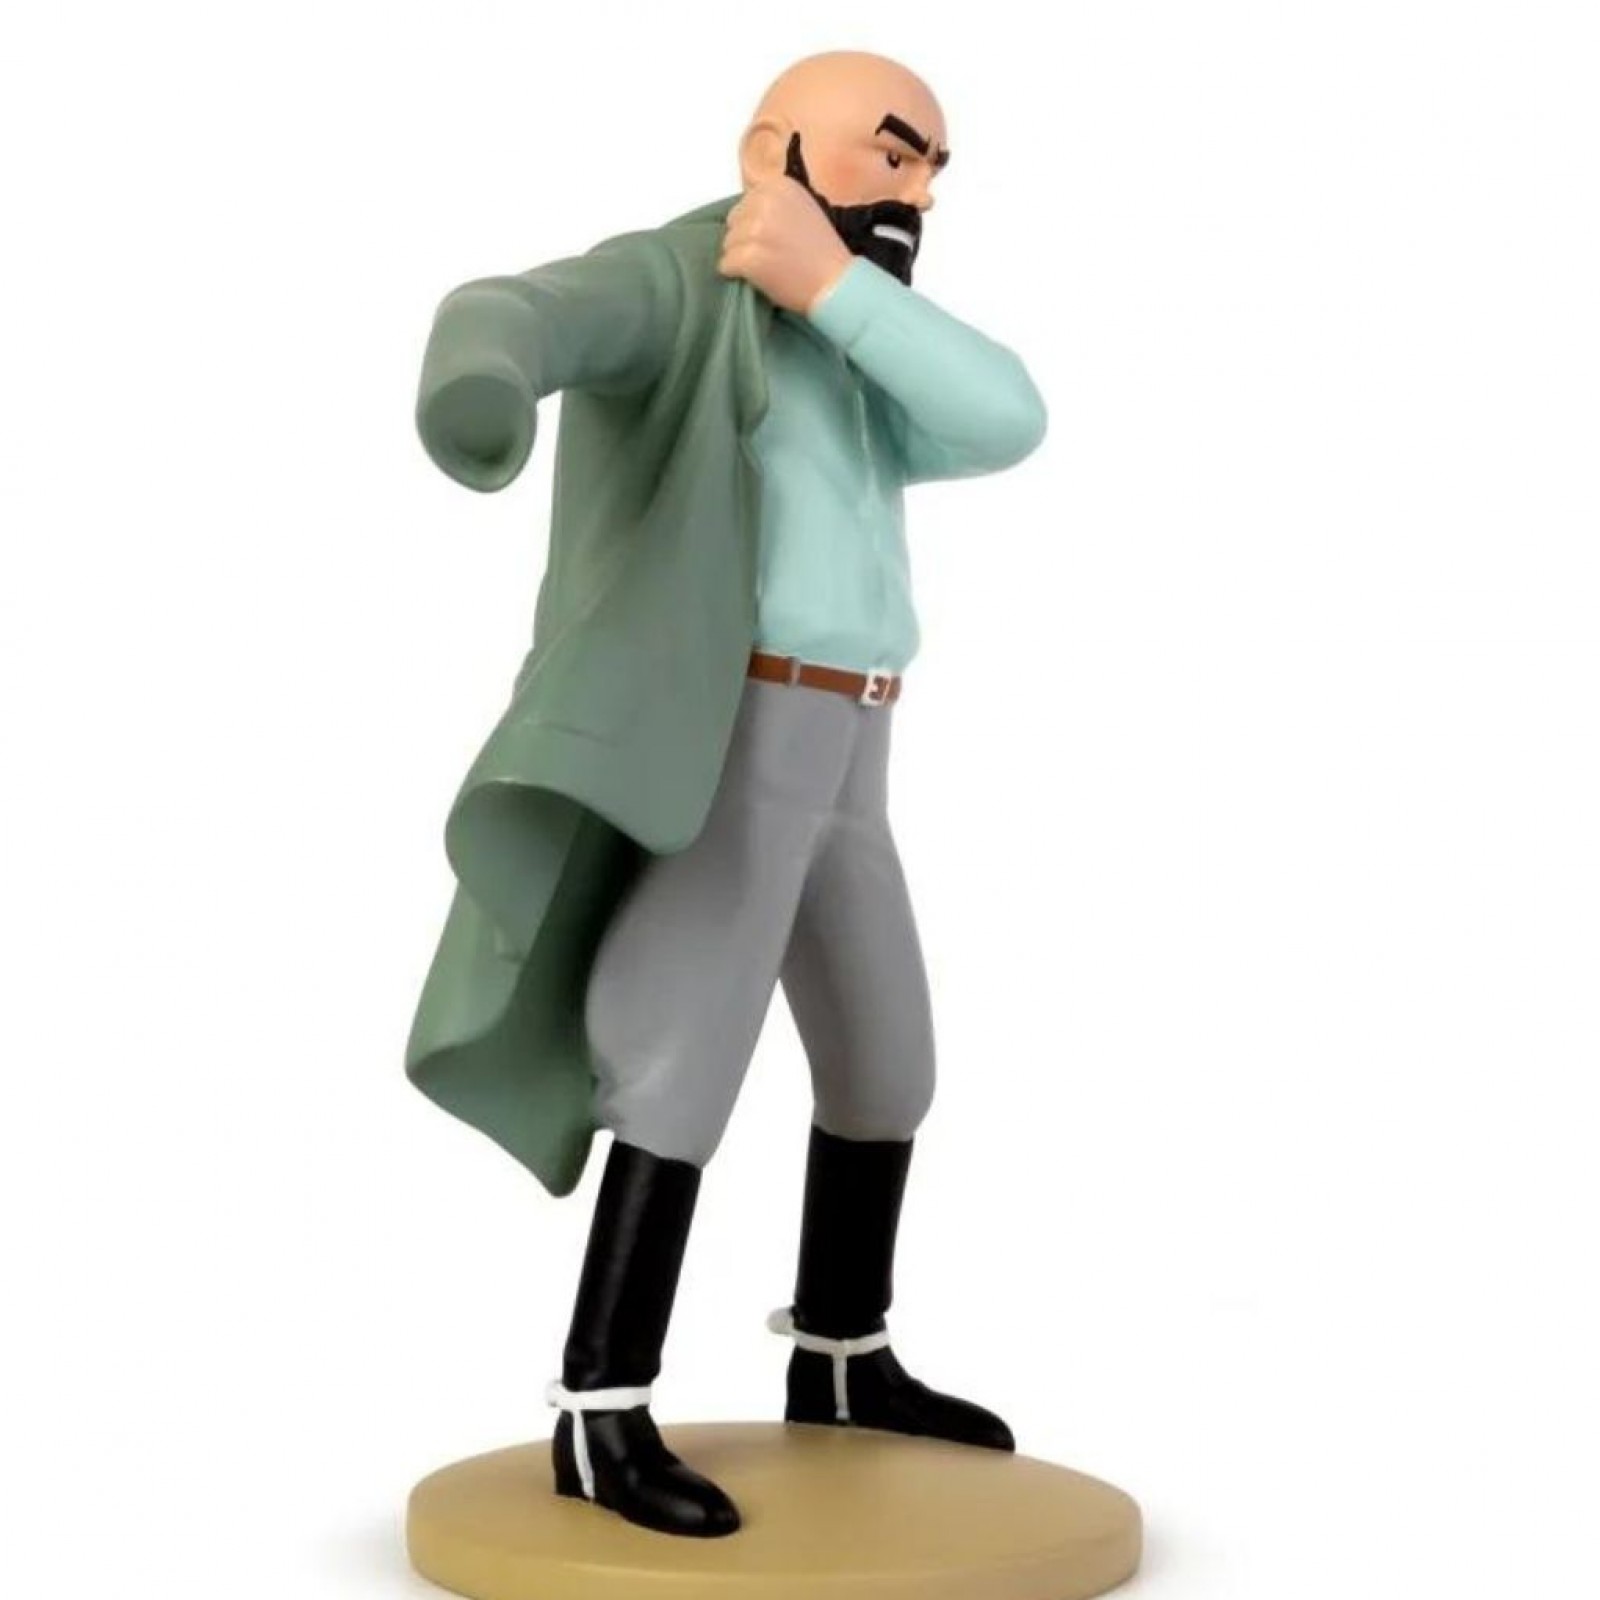 Rascar Capac resin statue figurine Collection Le Musée Imaginaire de Tintin  - Collector statues - CARTOONS IN A BOX - Store